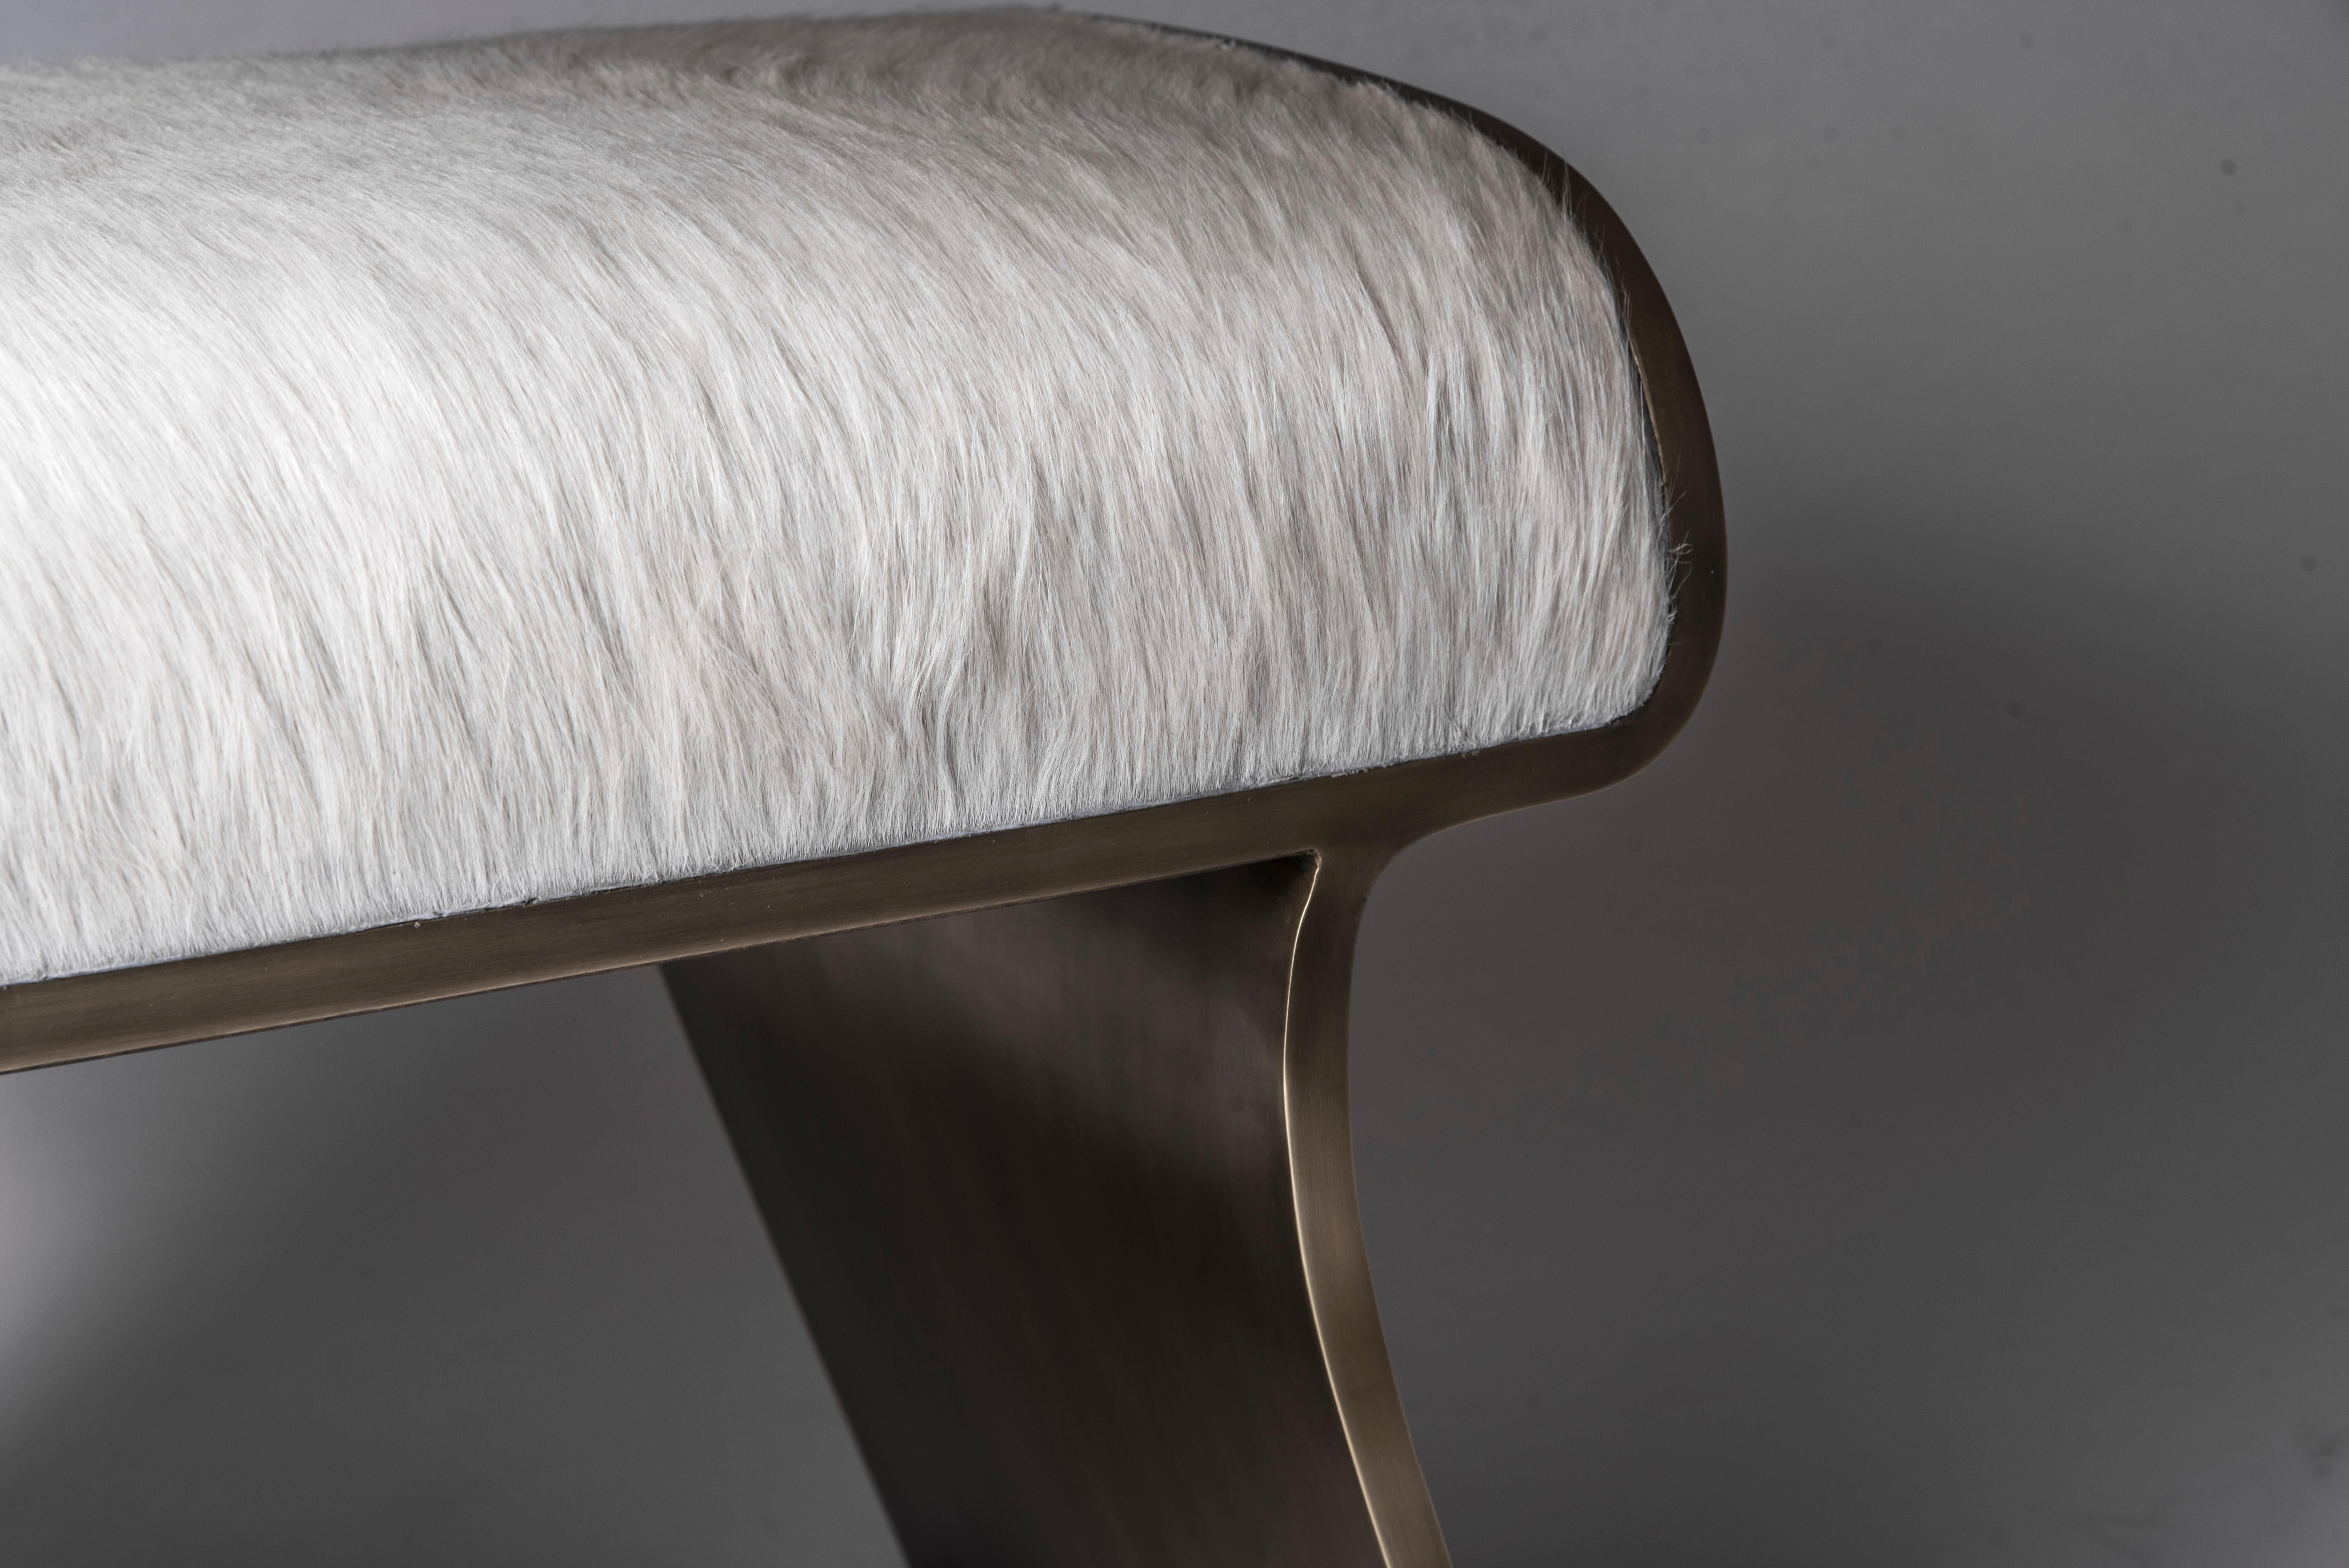 Art Deco Dandy Stool Upholstered in Cream Fur & Bronze-Patina Brass Details by Kifu Paris For Sale